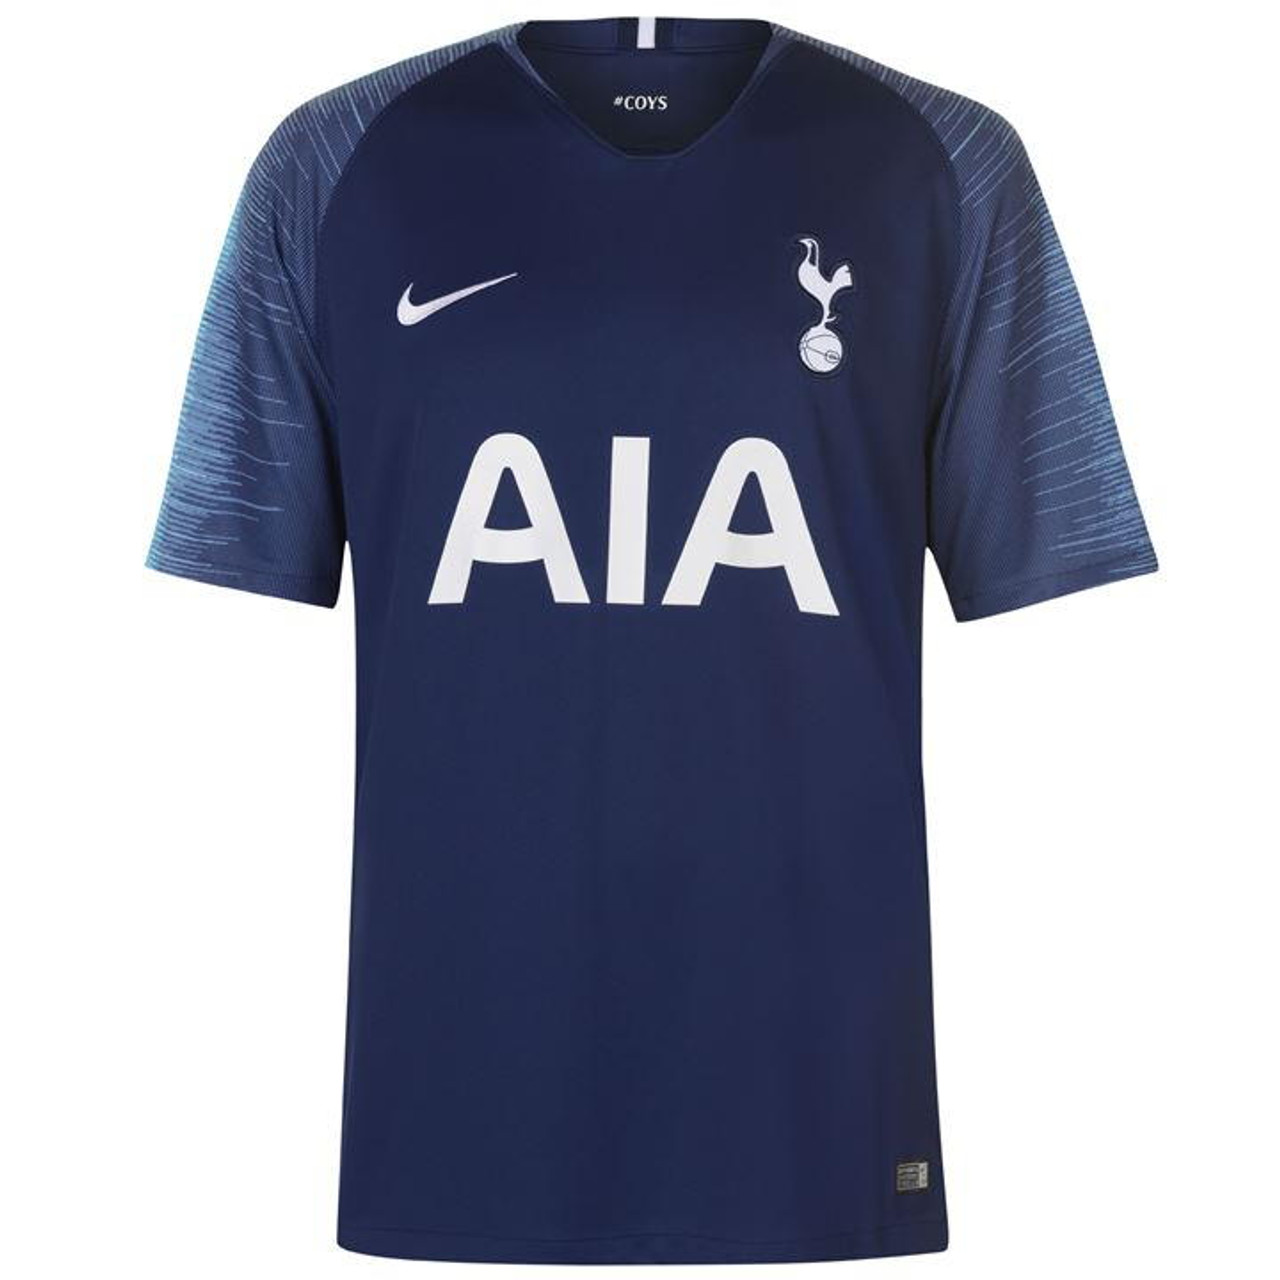 New Tottenham 2019/20 Nike kits: What we know so far about the home, away  and third shirts 